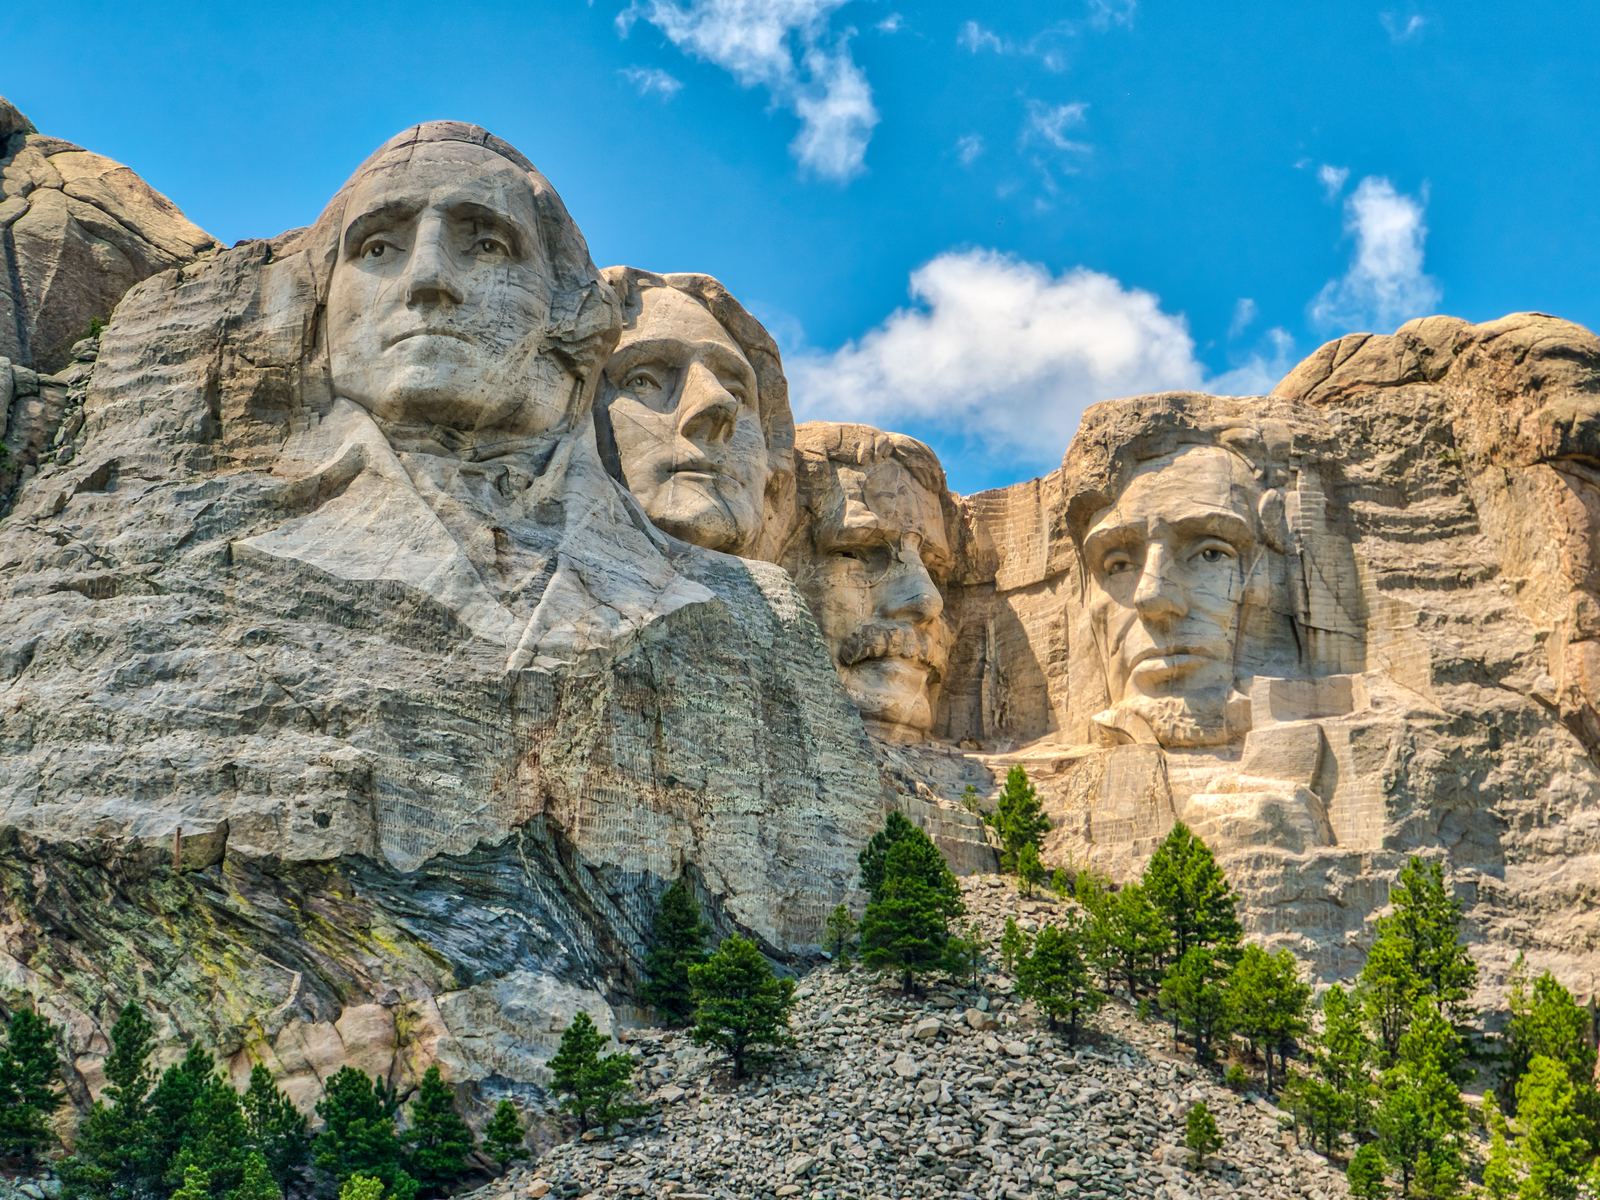 The famous landmark and one of the best South Dakota tourist attractions, Mount Rushmore National Monument where the faces of four US presidents are sculpted on a mountain